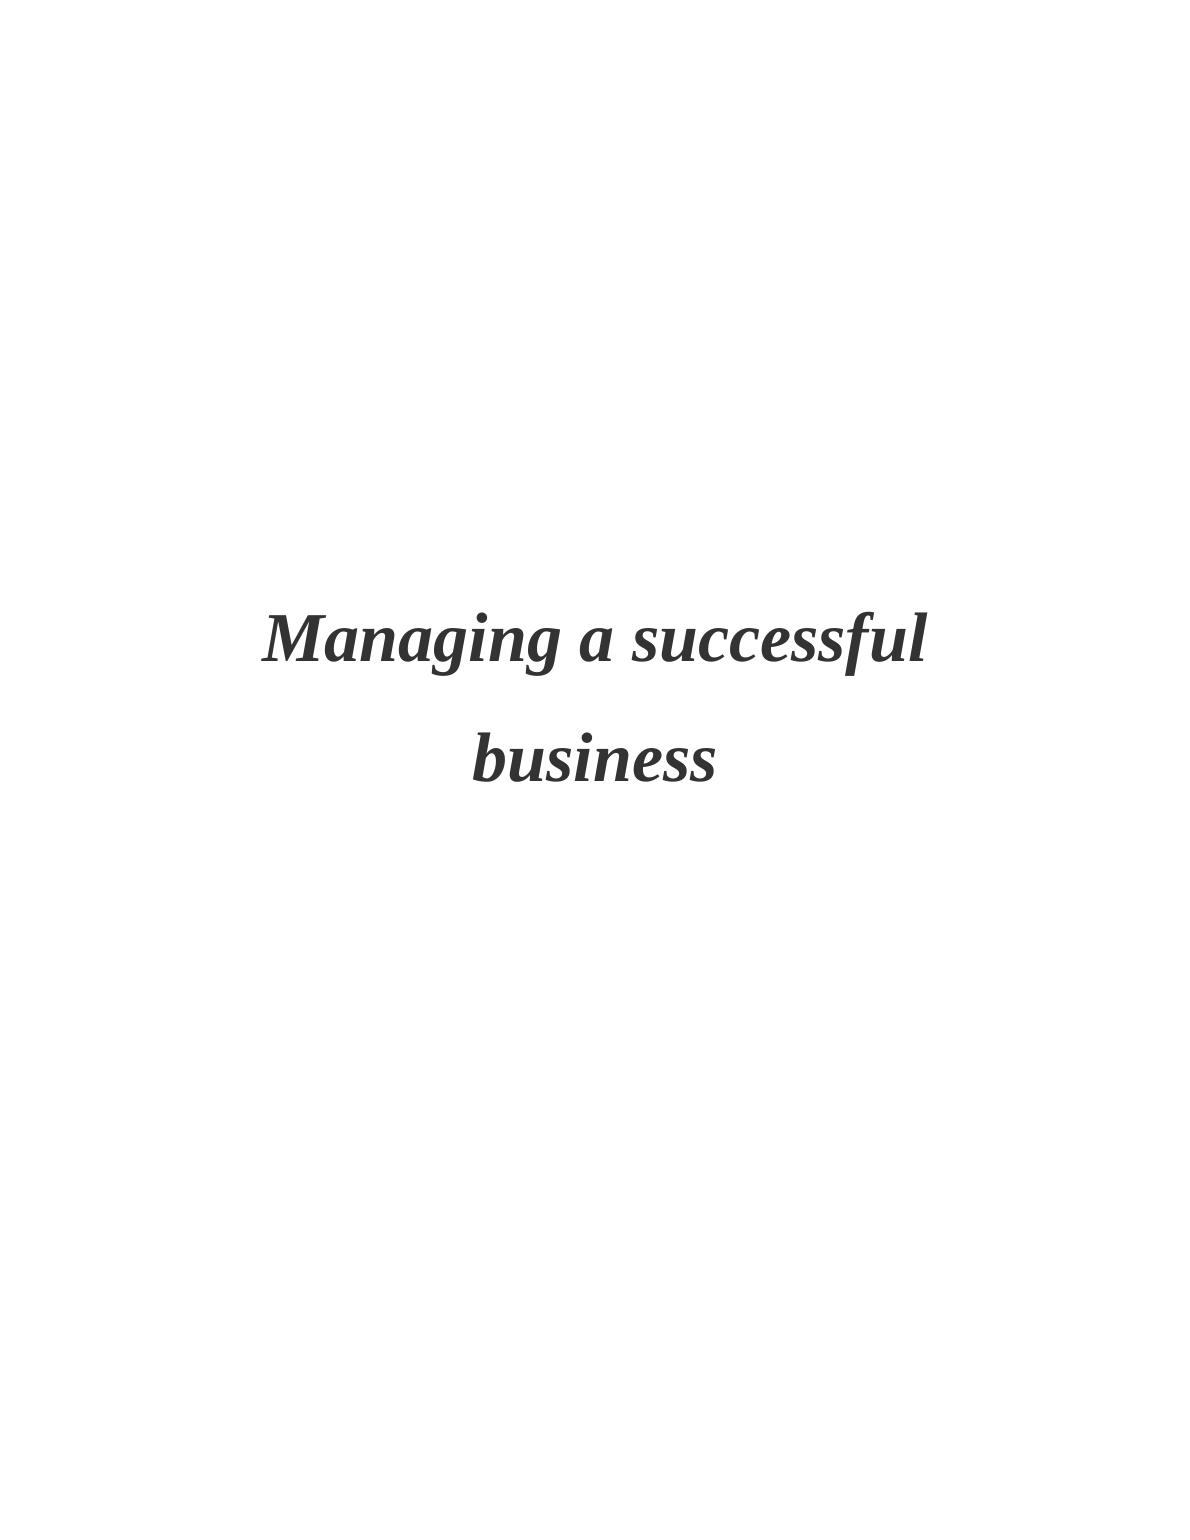 Managing a Successful Business - Holiday Inn hotel_1